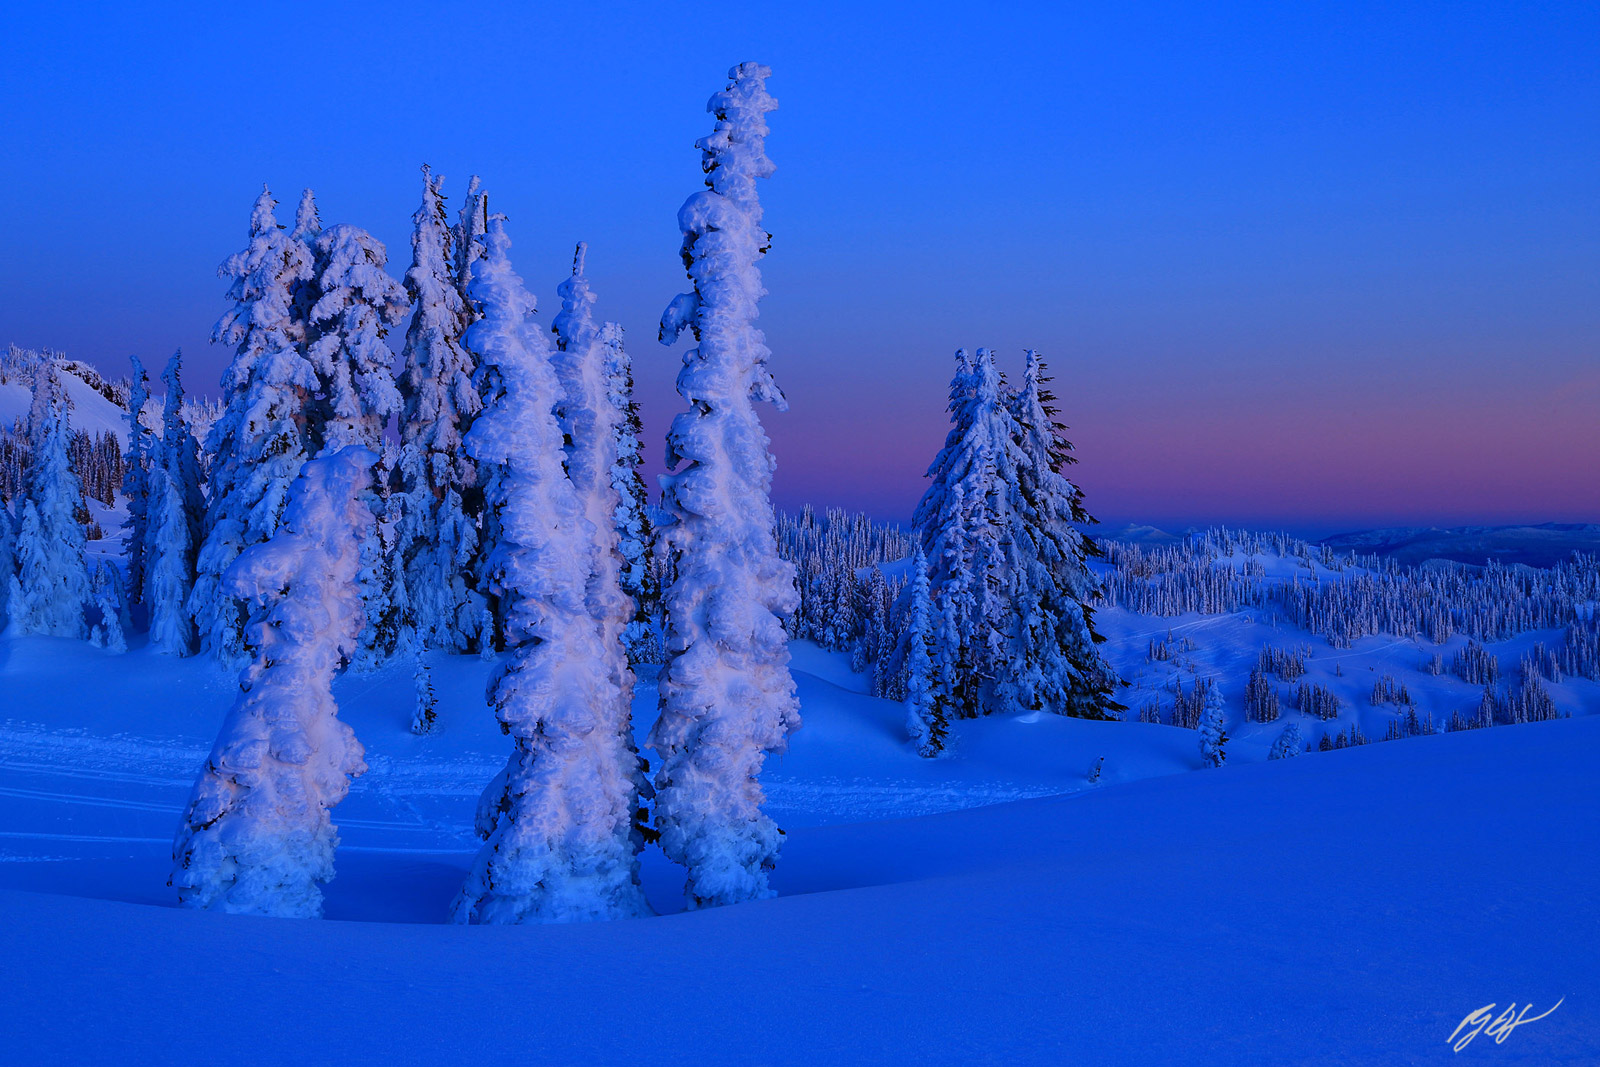 Winter Trees in Alpenglow from Paradise Meadows in Mt Rainier National Park in Washington